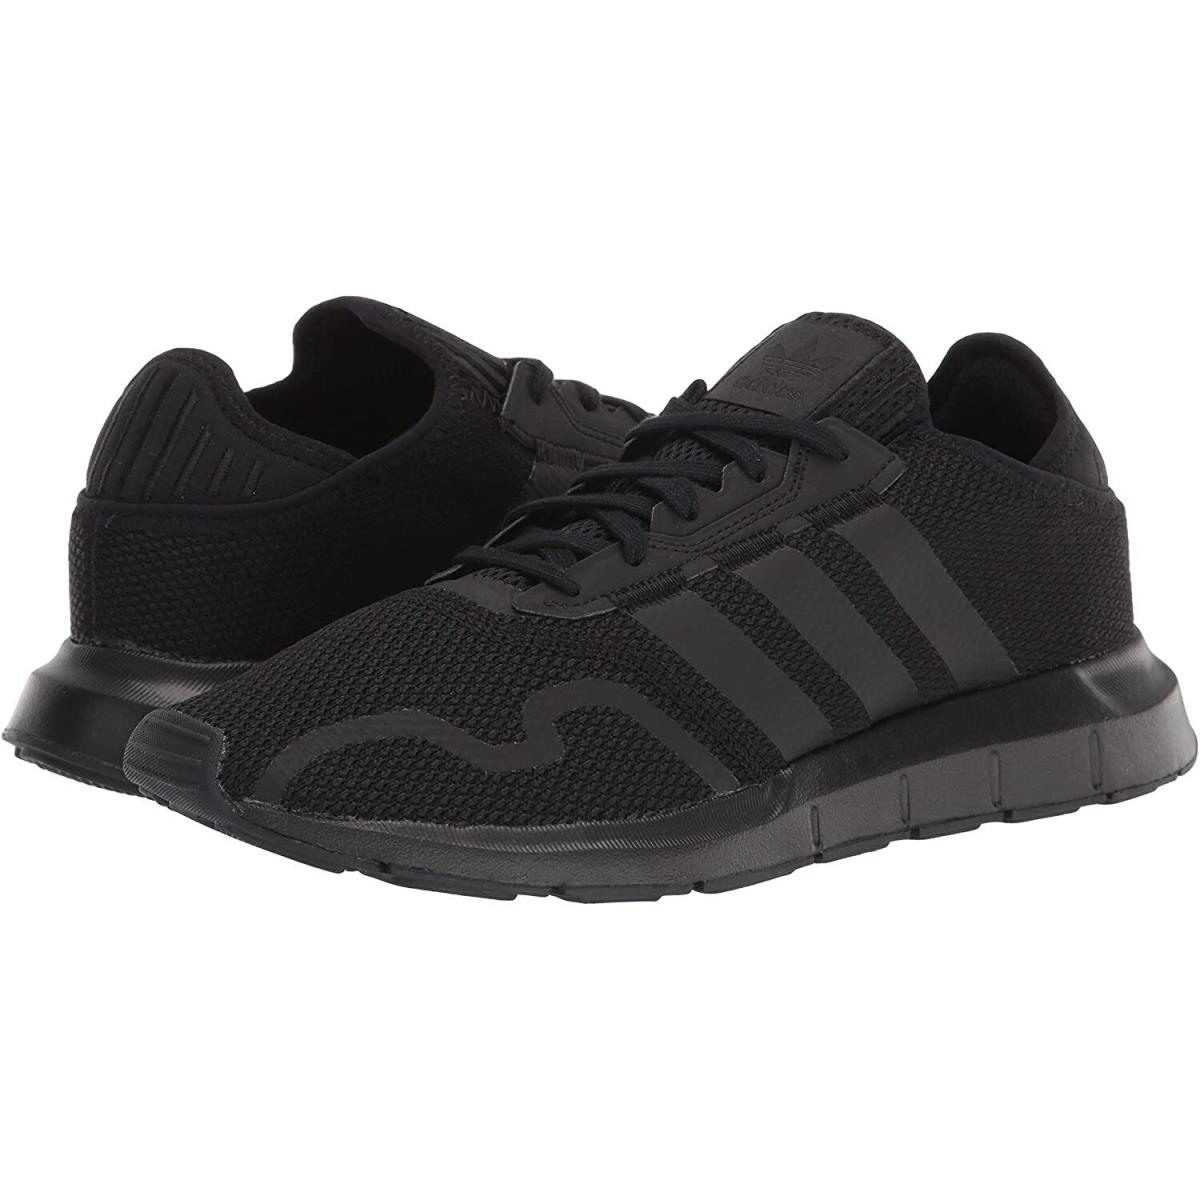 Men`s Shoes Adidas Swift Run X Casual Athletic Sneakers FY2116 Black - Black